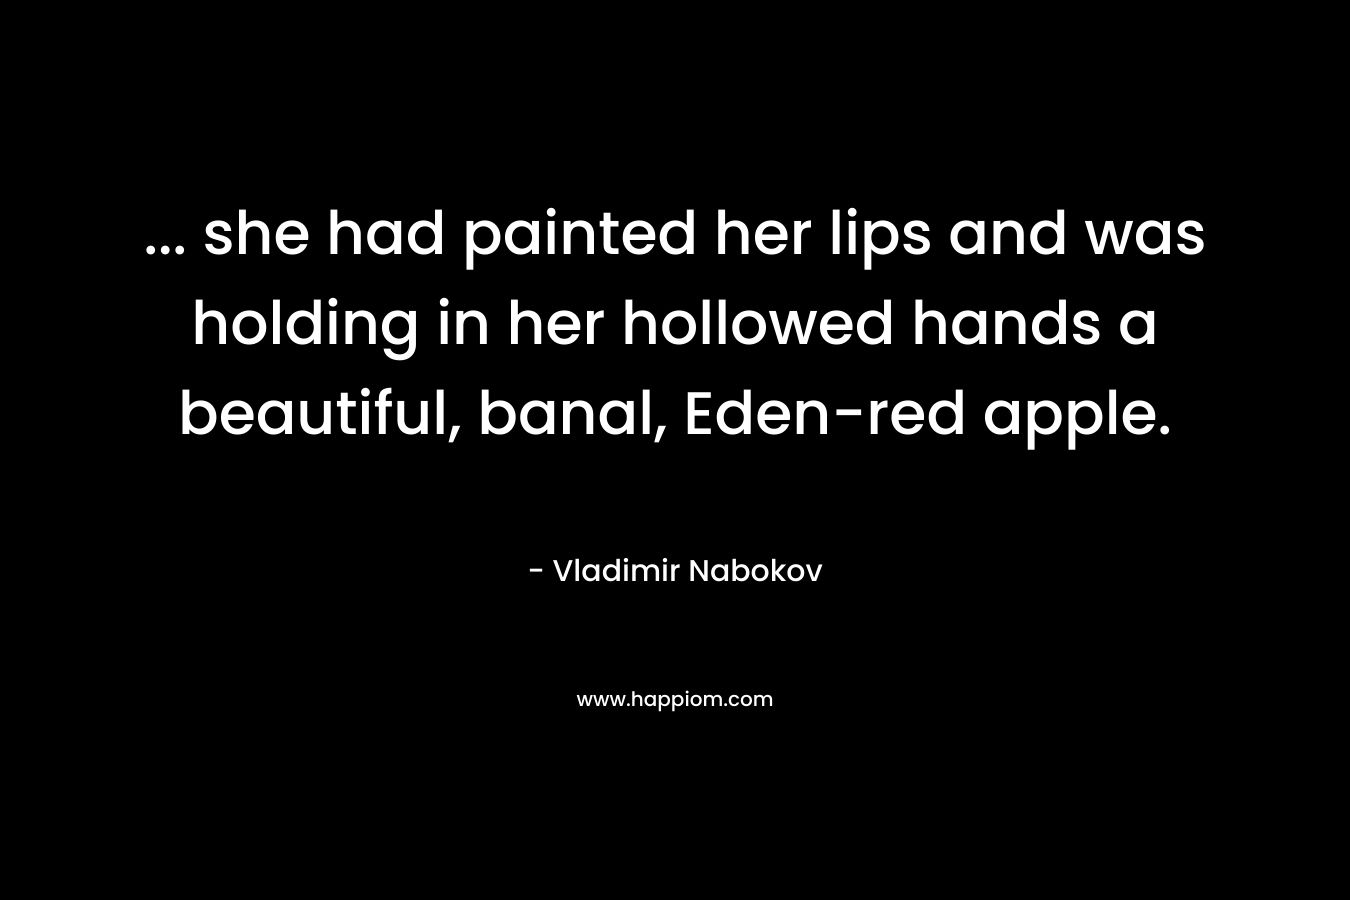 … she had painted her lips and was holding in her hollowed hands a beautiful, banal, Eden-red apple. – Vladimir Nabokov